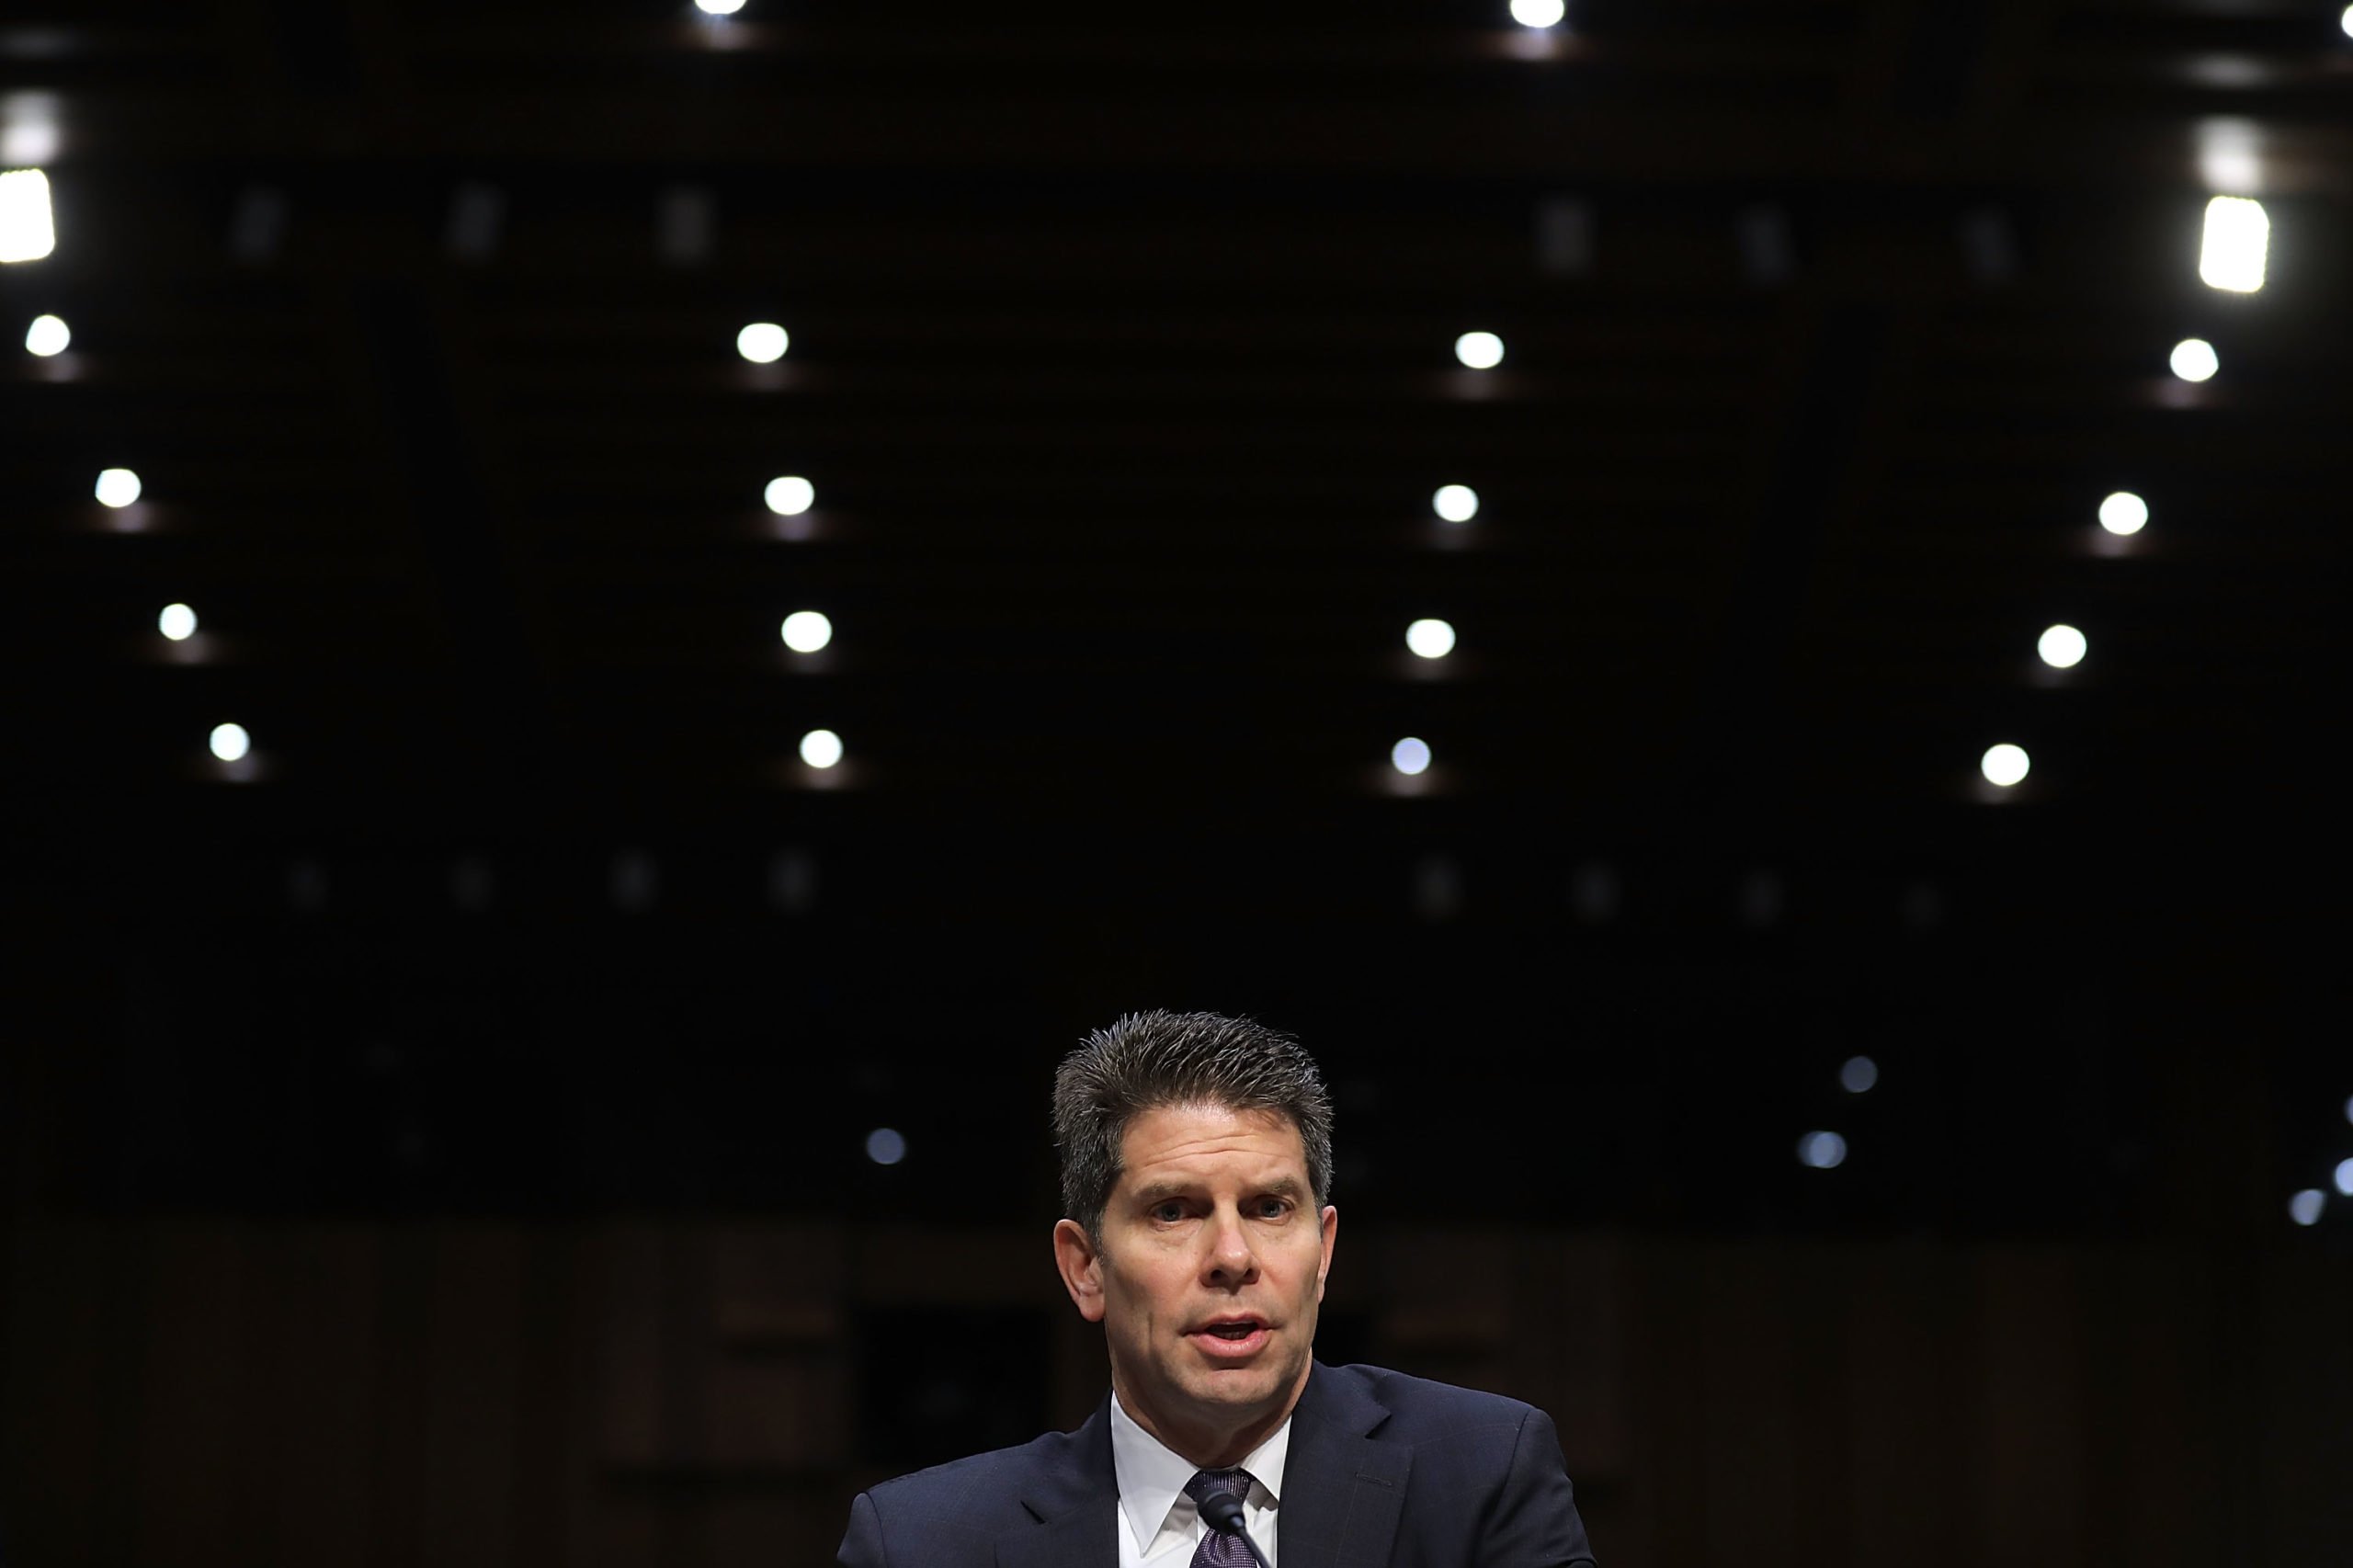 WASHINGTON, DC - MARCH 14: Acting Deputy Director of the Federal Bureau of Investigation David Bowdich testifies before the Senate Judiciary Committee during a hearing about the massacre at Marjorie Stoneman Douglas High School in the Hart Senate Office Building on Capitol Hill March 14, 2018 in Washington, DC.Bowdich testified that the FBI could have and should have done more to stop the school shooter Nikolas Cruz after it receieved several tips about him. (Photo by Chip Somodevilla/Getty Images)